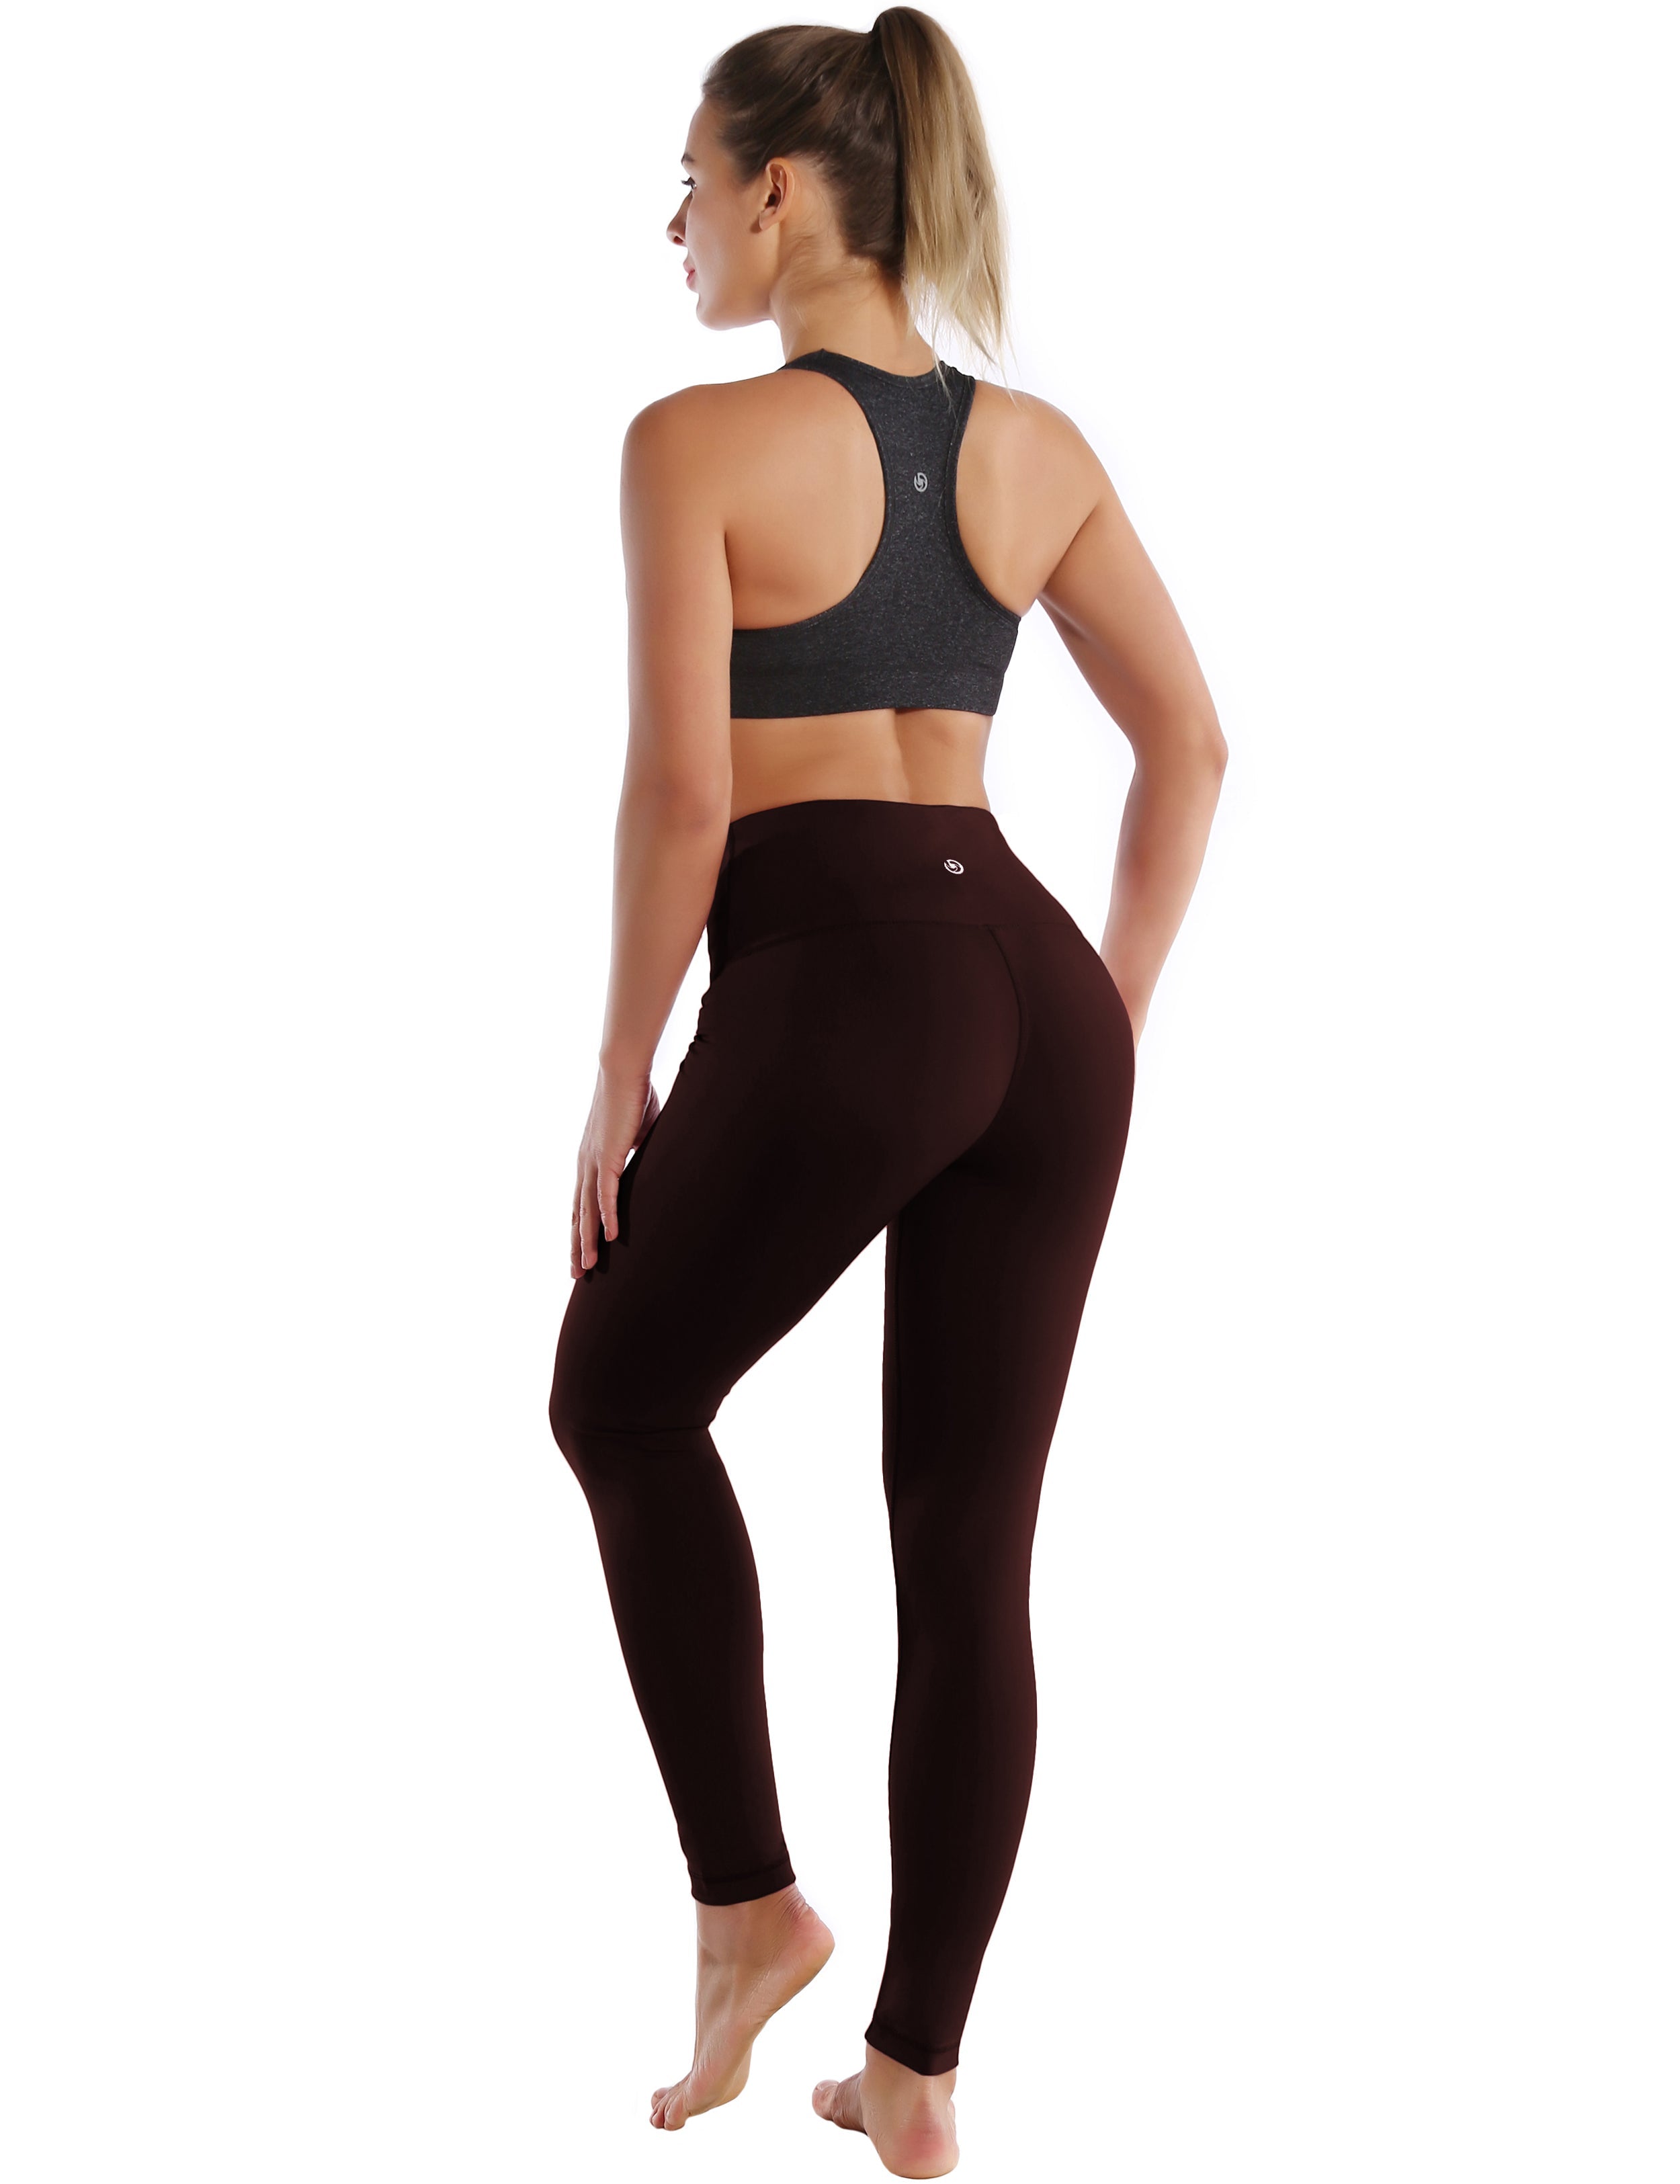 High Waist Pilates Pants mahoganymaroon 75%Nylon/25%Spandex Fabric doesn't attract lint easily 4-way stretch No see-through Moisture-wicking Tummy control Inner pocket Four lengths